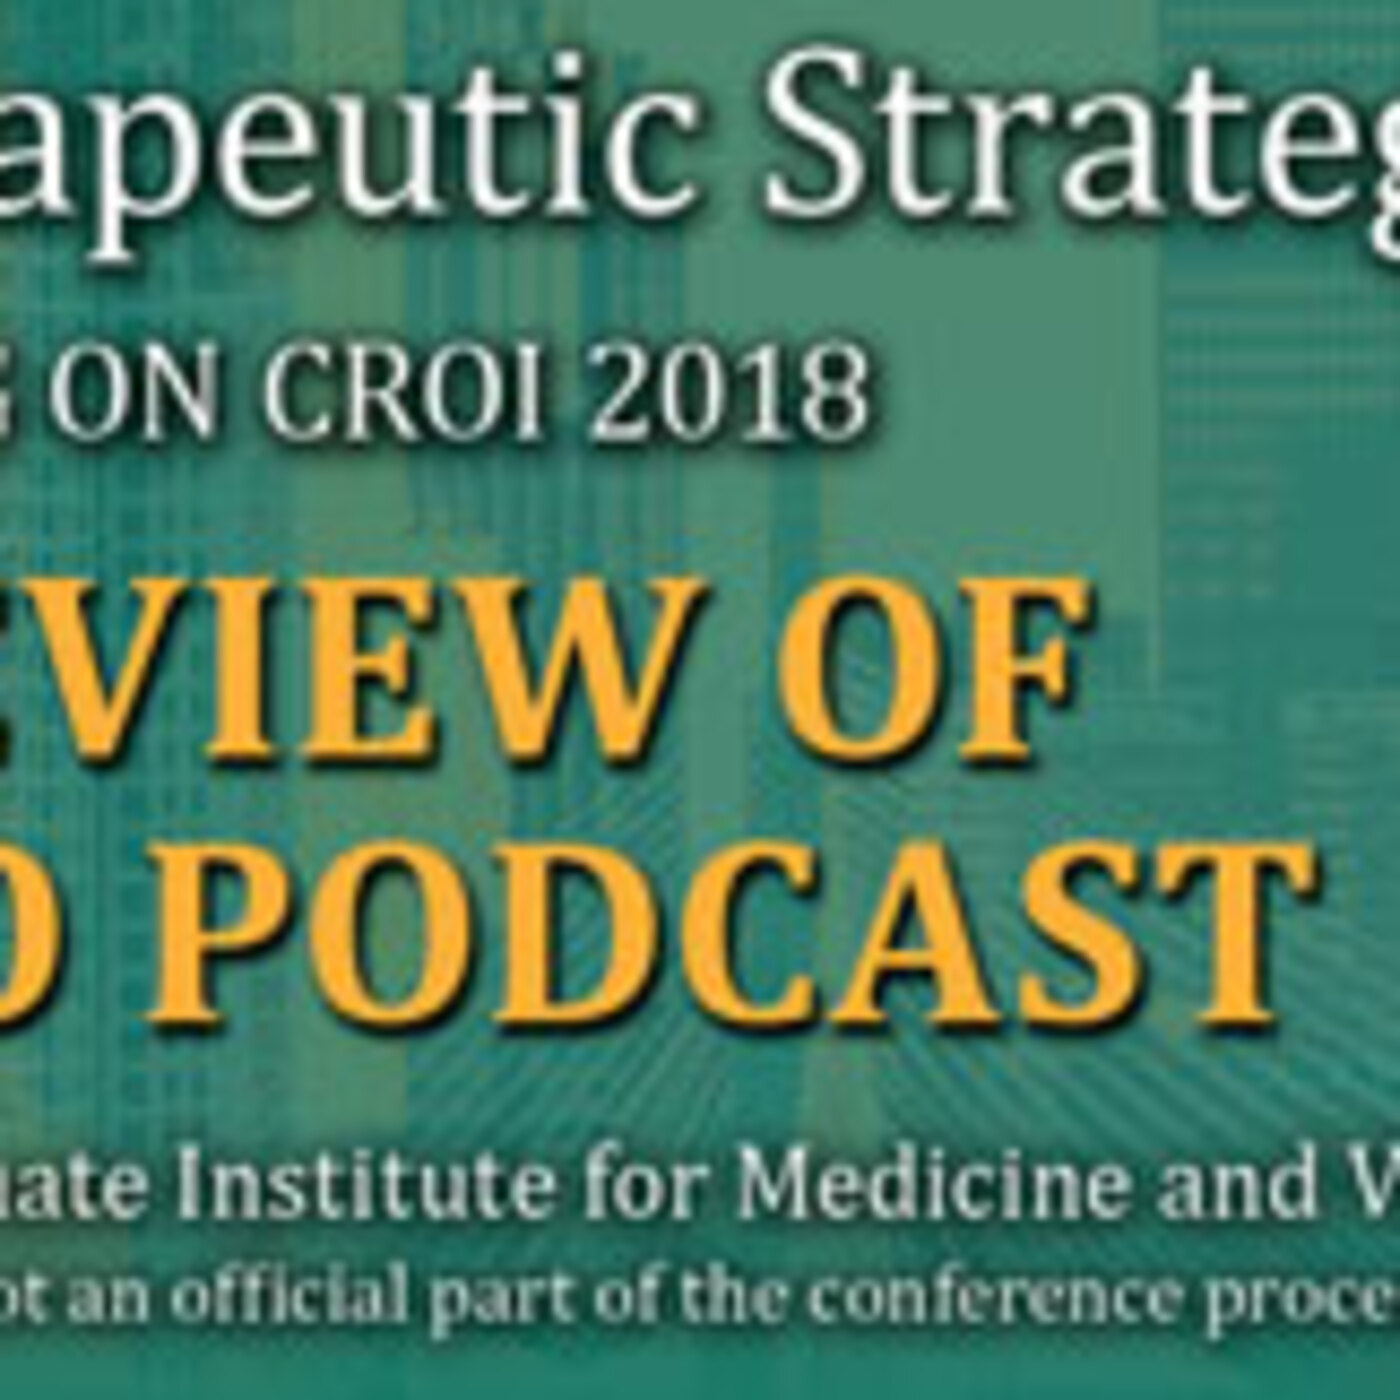 Rapid Fire Review of CROI 2018